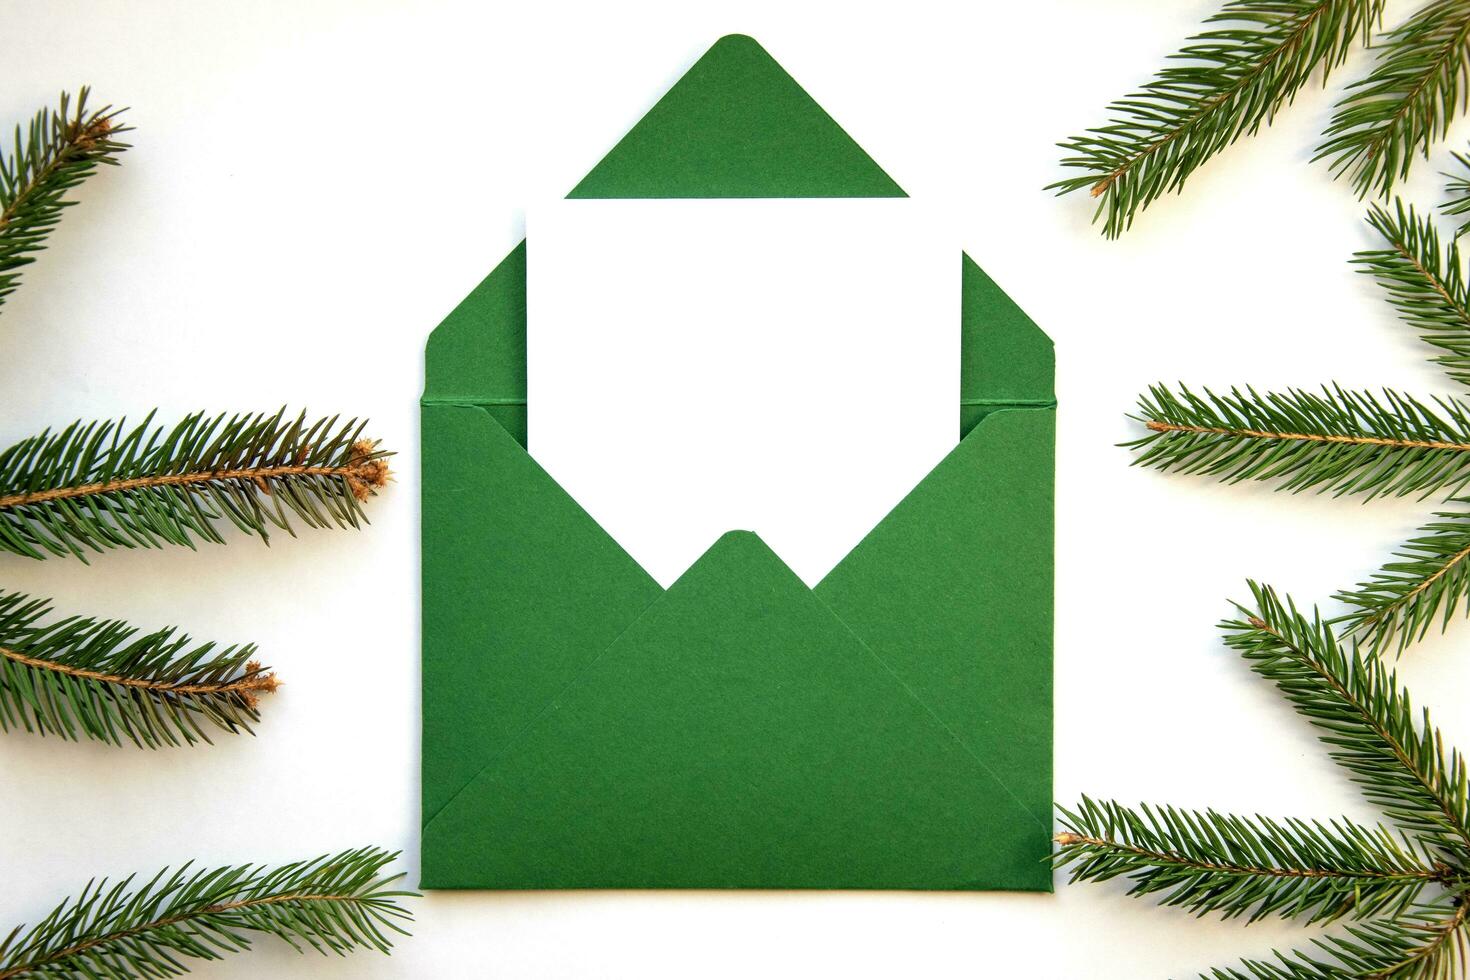 Fir branch on a white background. Green handmade envelope and blank for text. Christmas background. photo